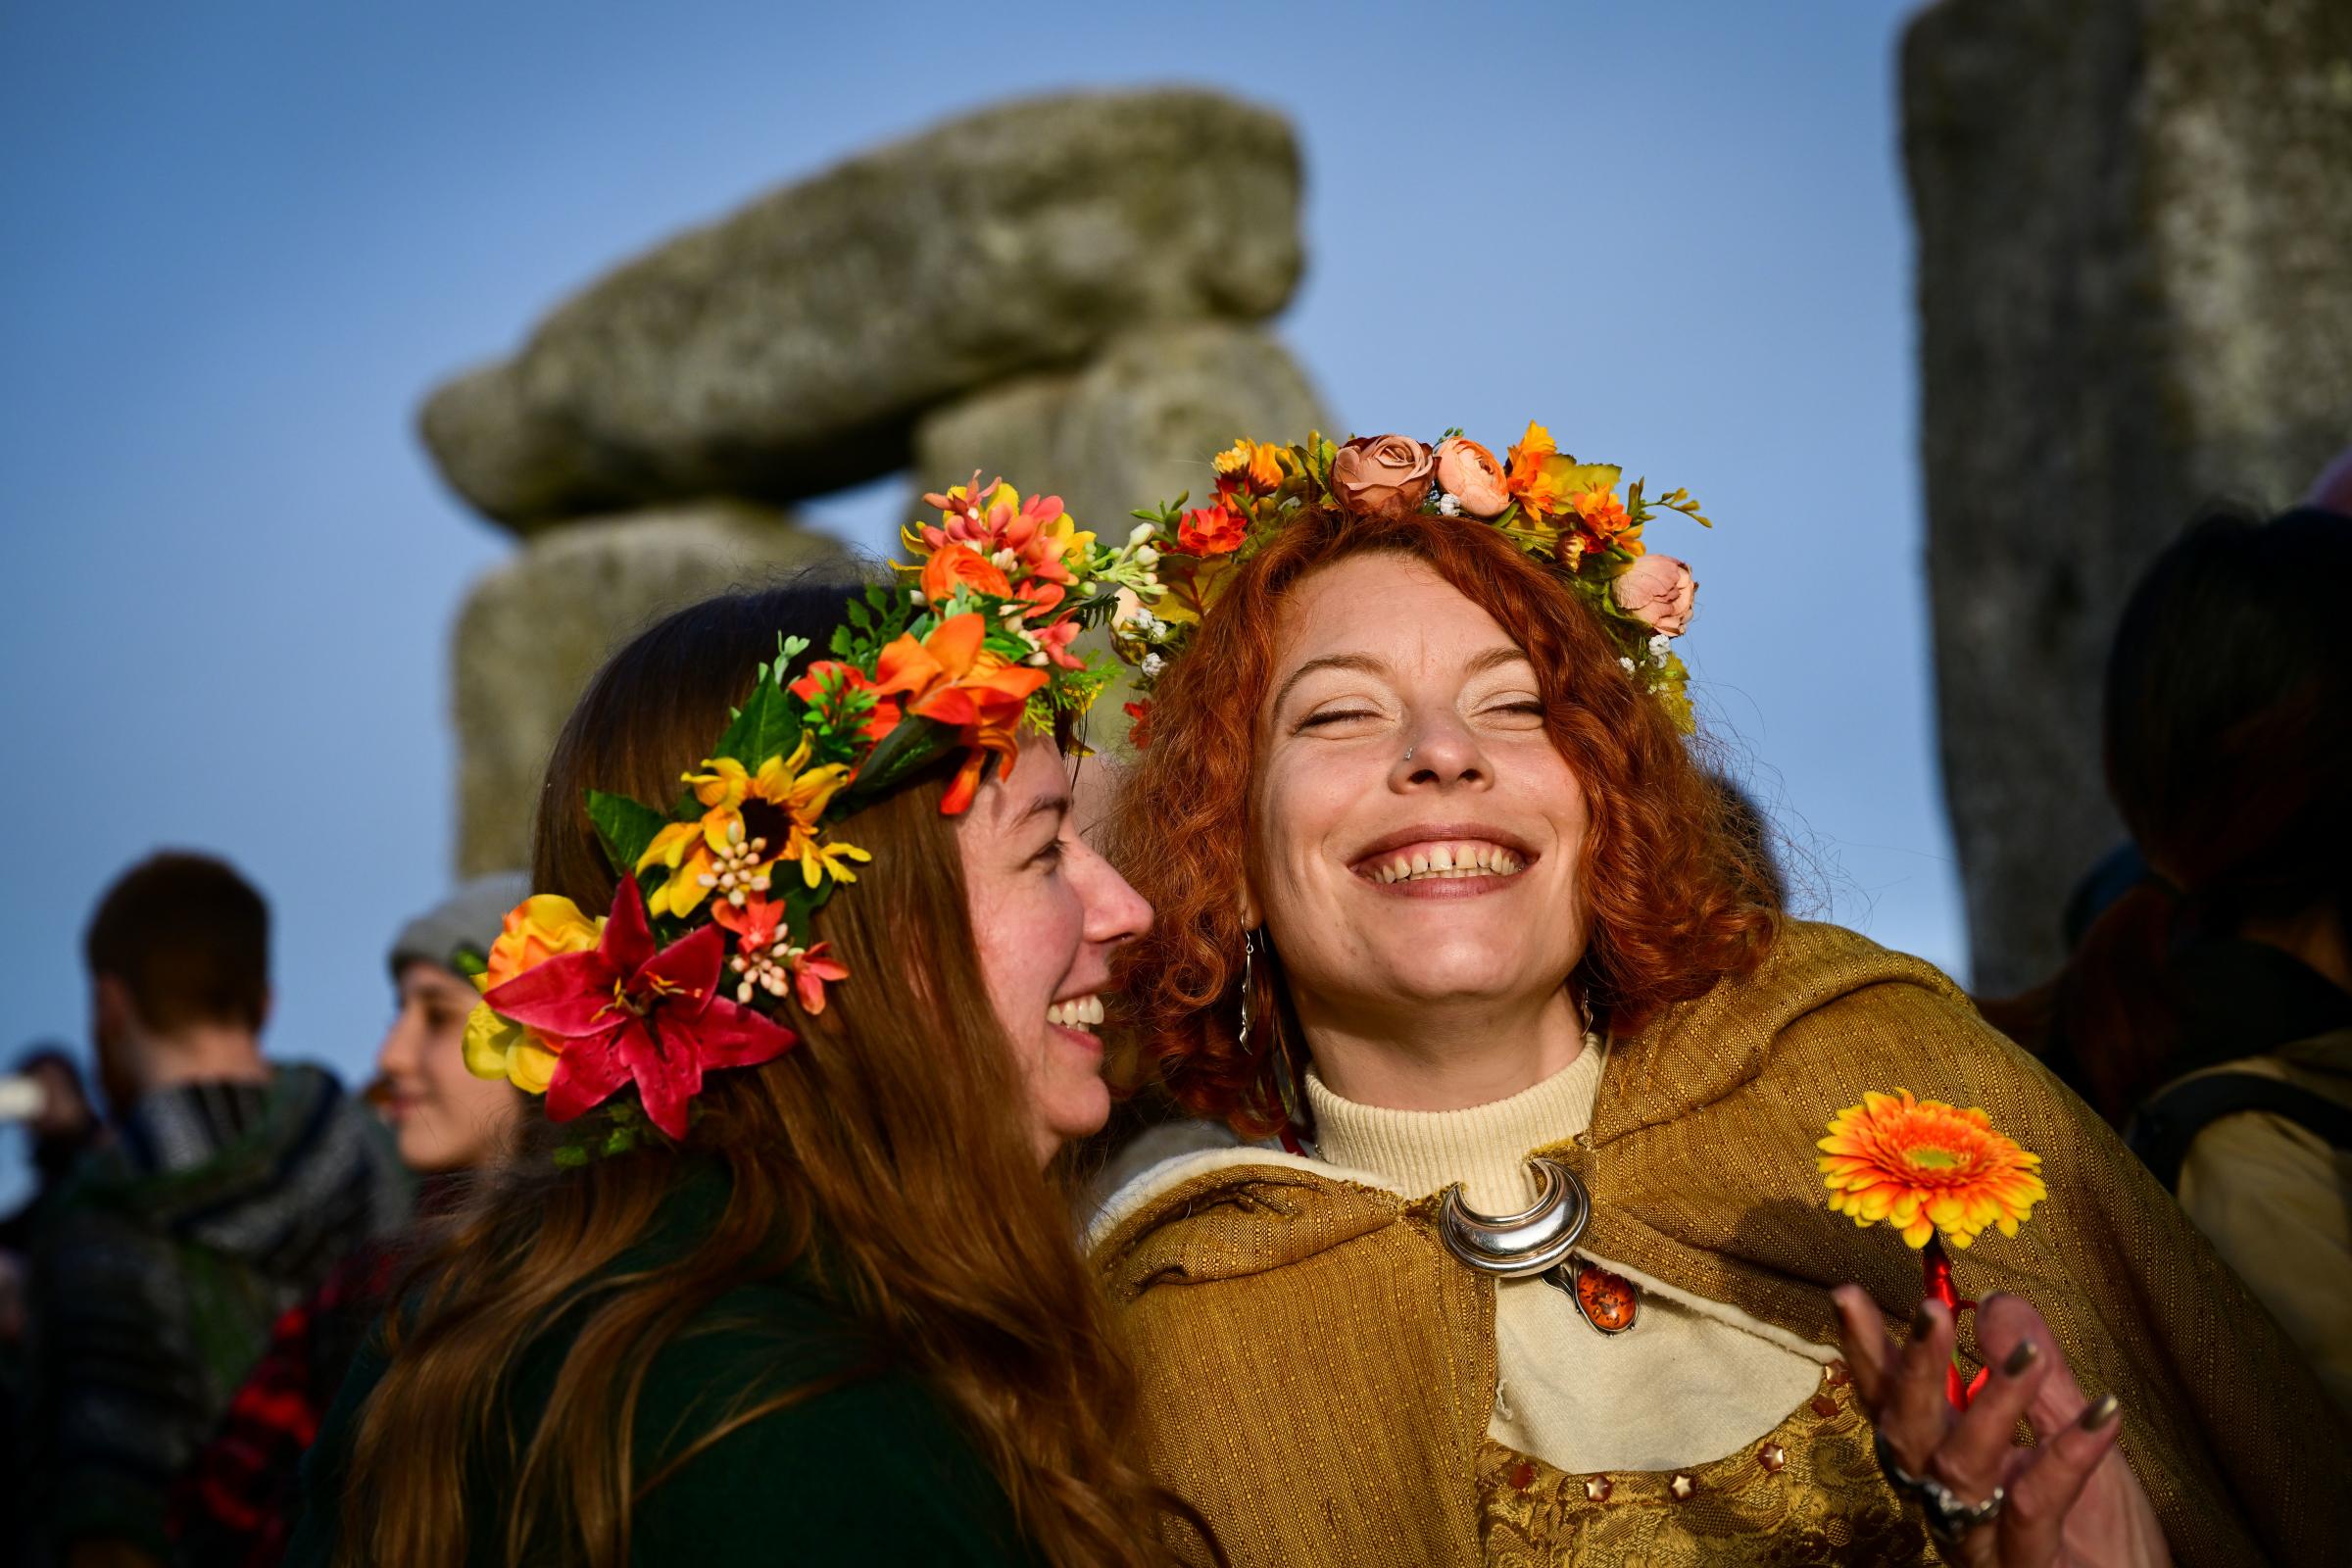 Paganism is on the rise in Scotland – and that makes perfect sense